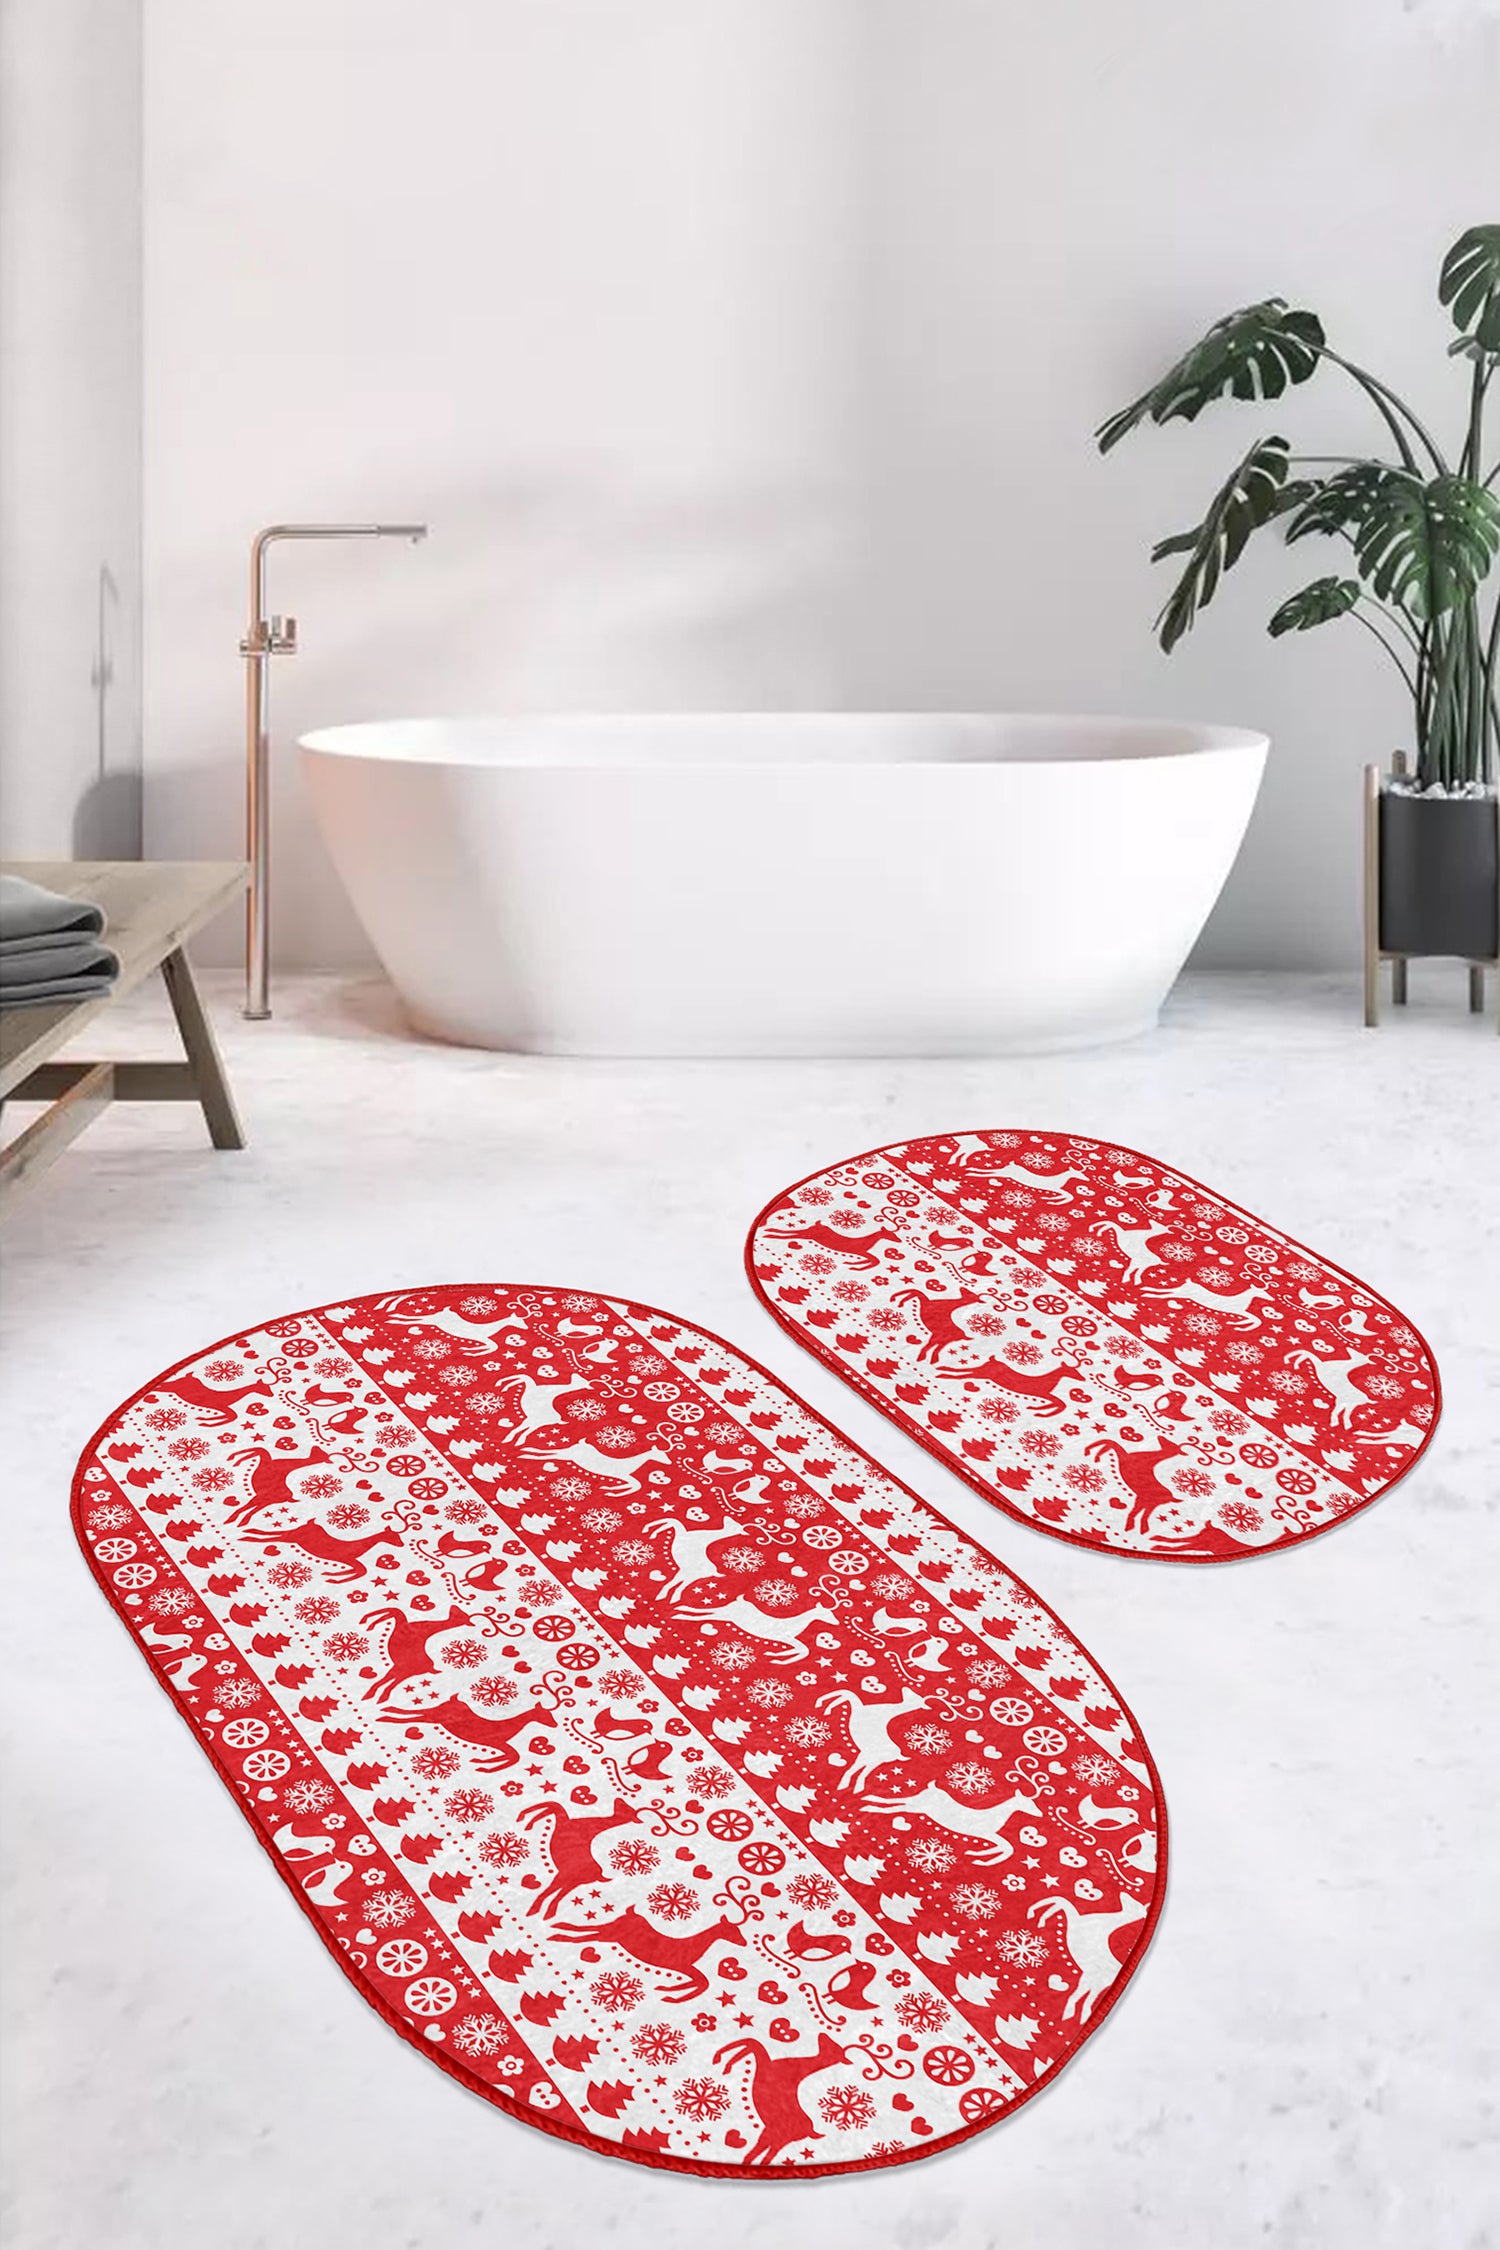 Festive Holiday Bathroom Mat Collection in Red and White